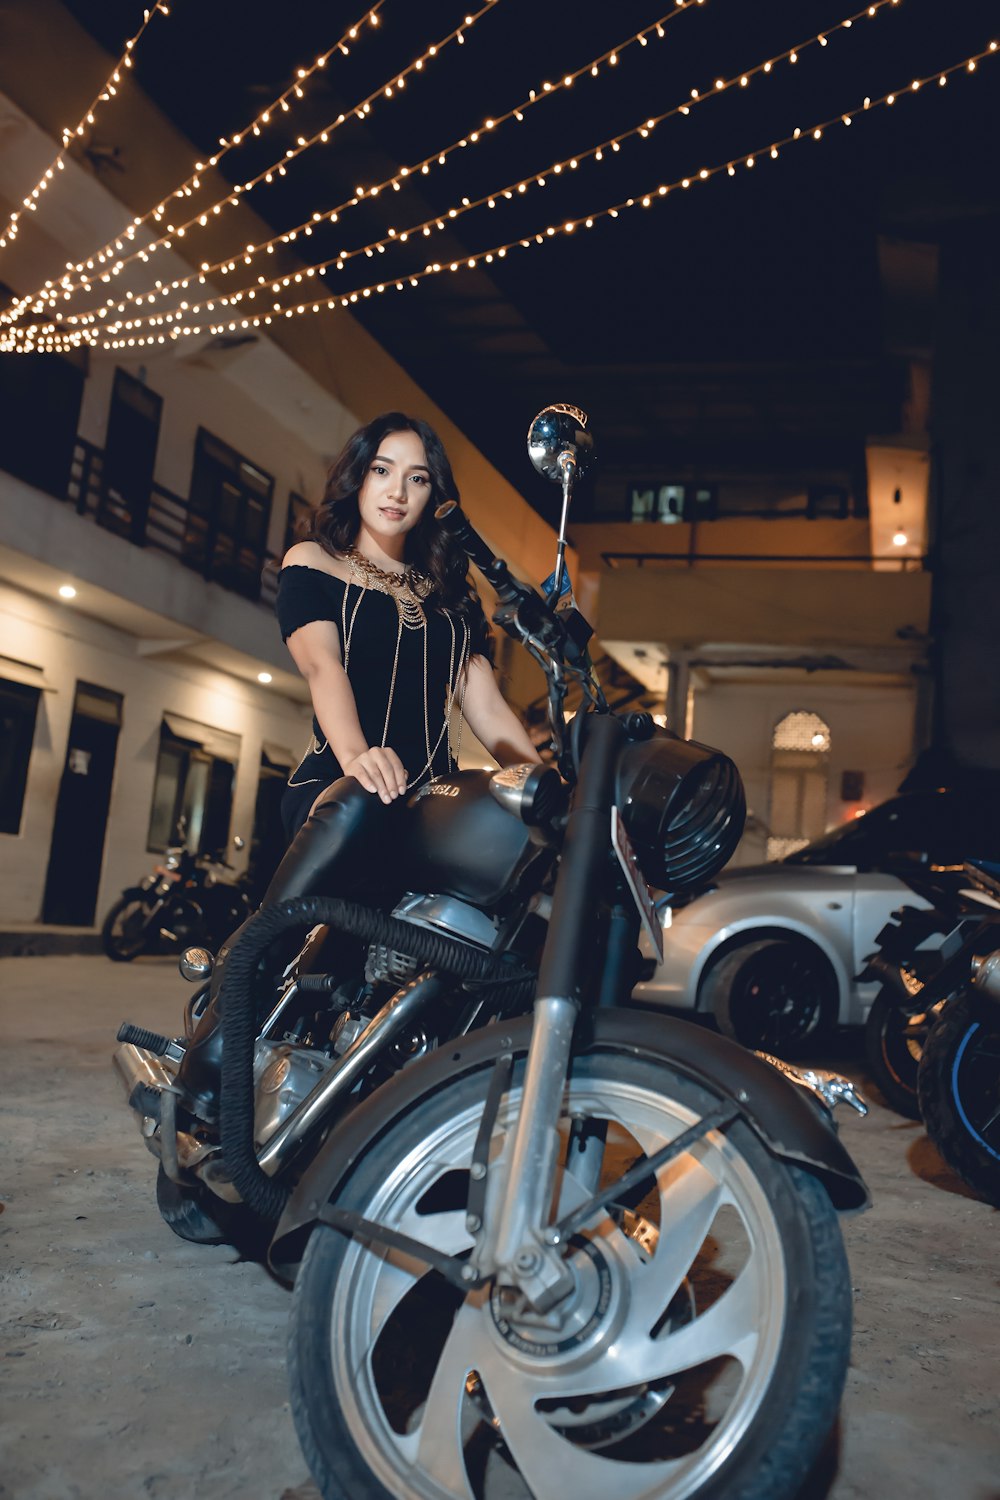 woman in black dress riding on black motorcycle during night time